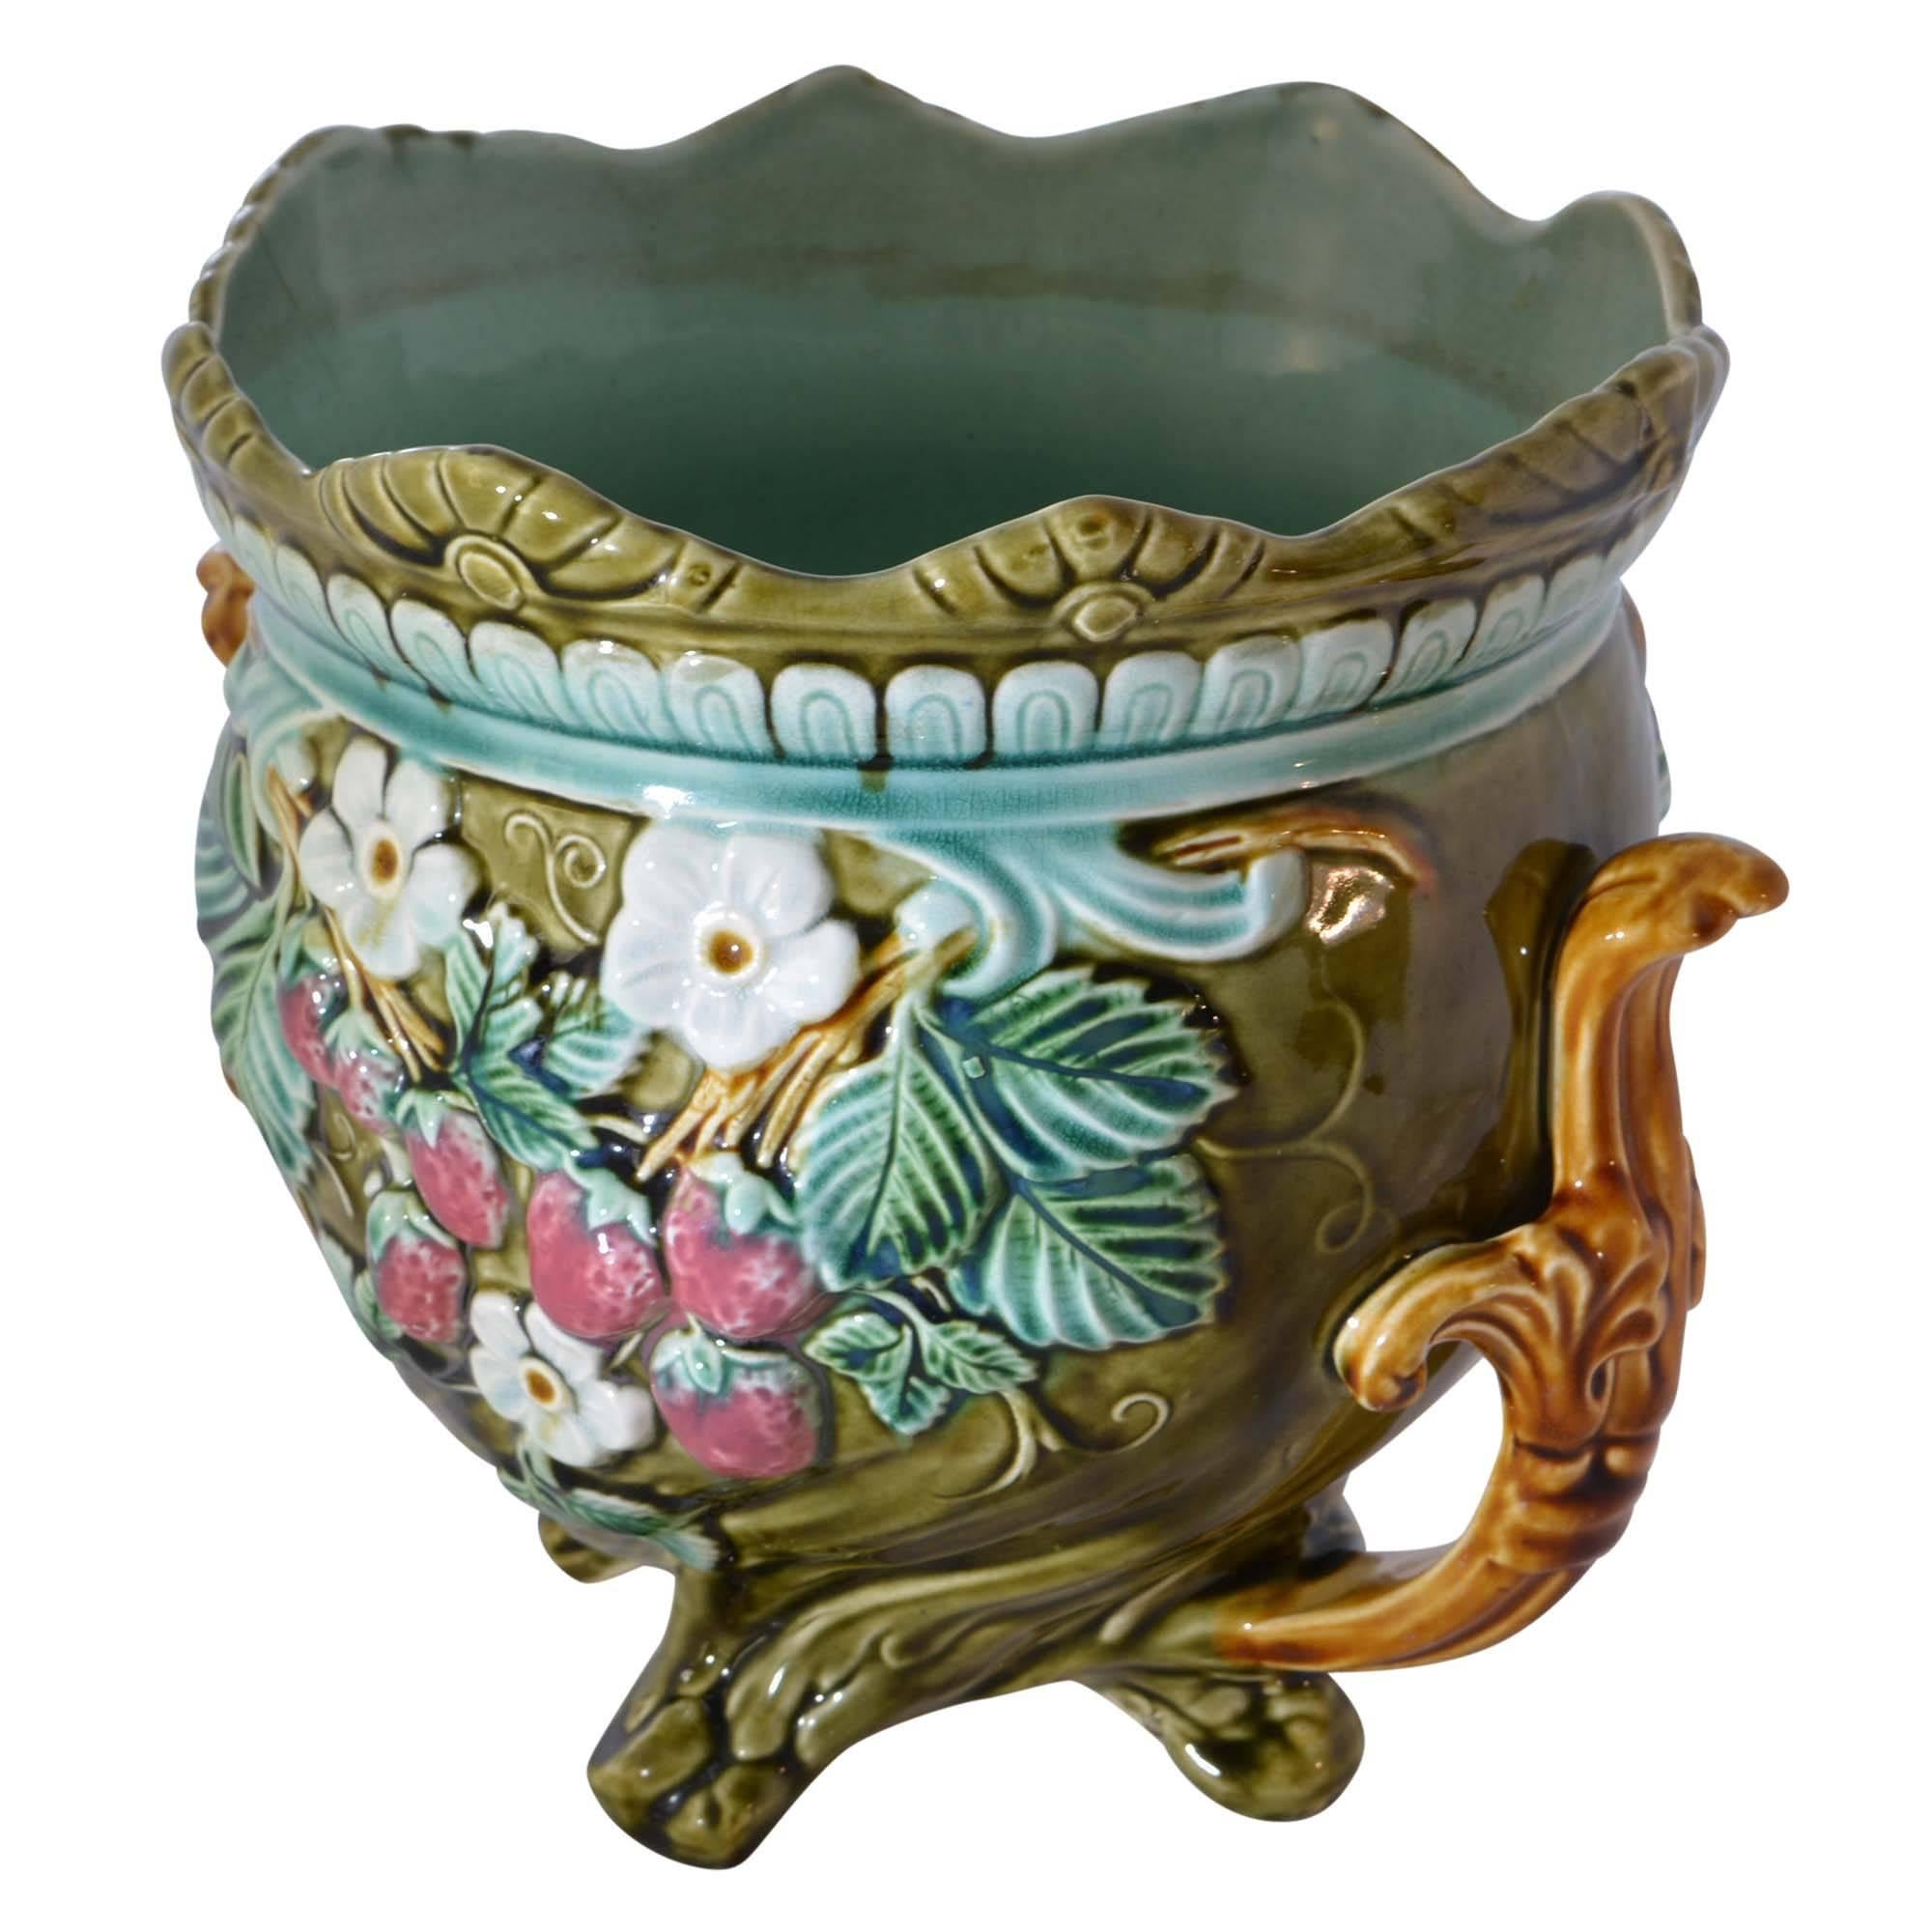 A colorful antique Onnaing French Majolica jardinière is in matching style to the other jardinière. This antique jardinière has a wavy flared rim and a raised floral design on the side with strawberry shaped accents. There is a teal finish inside of